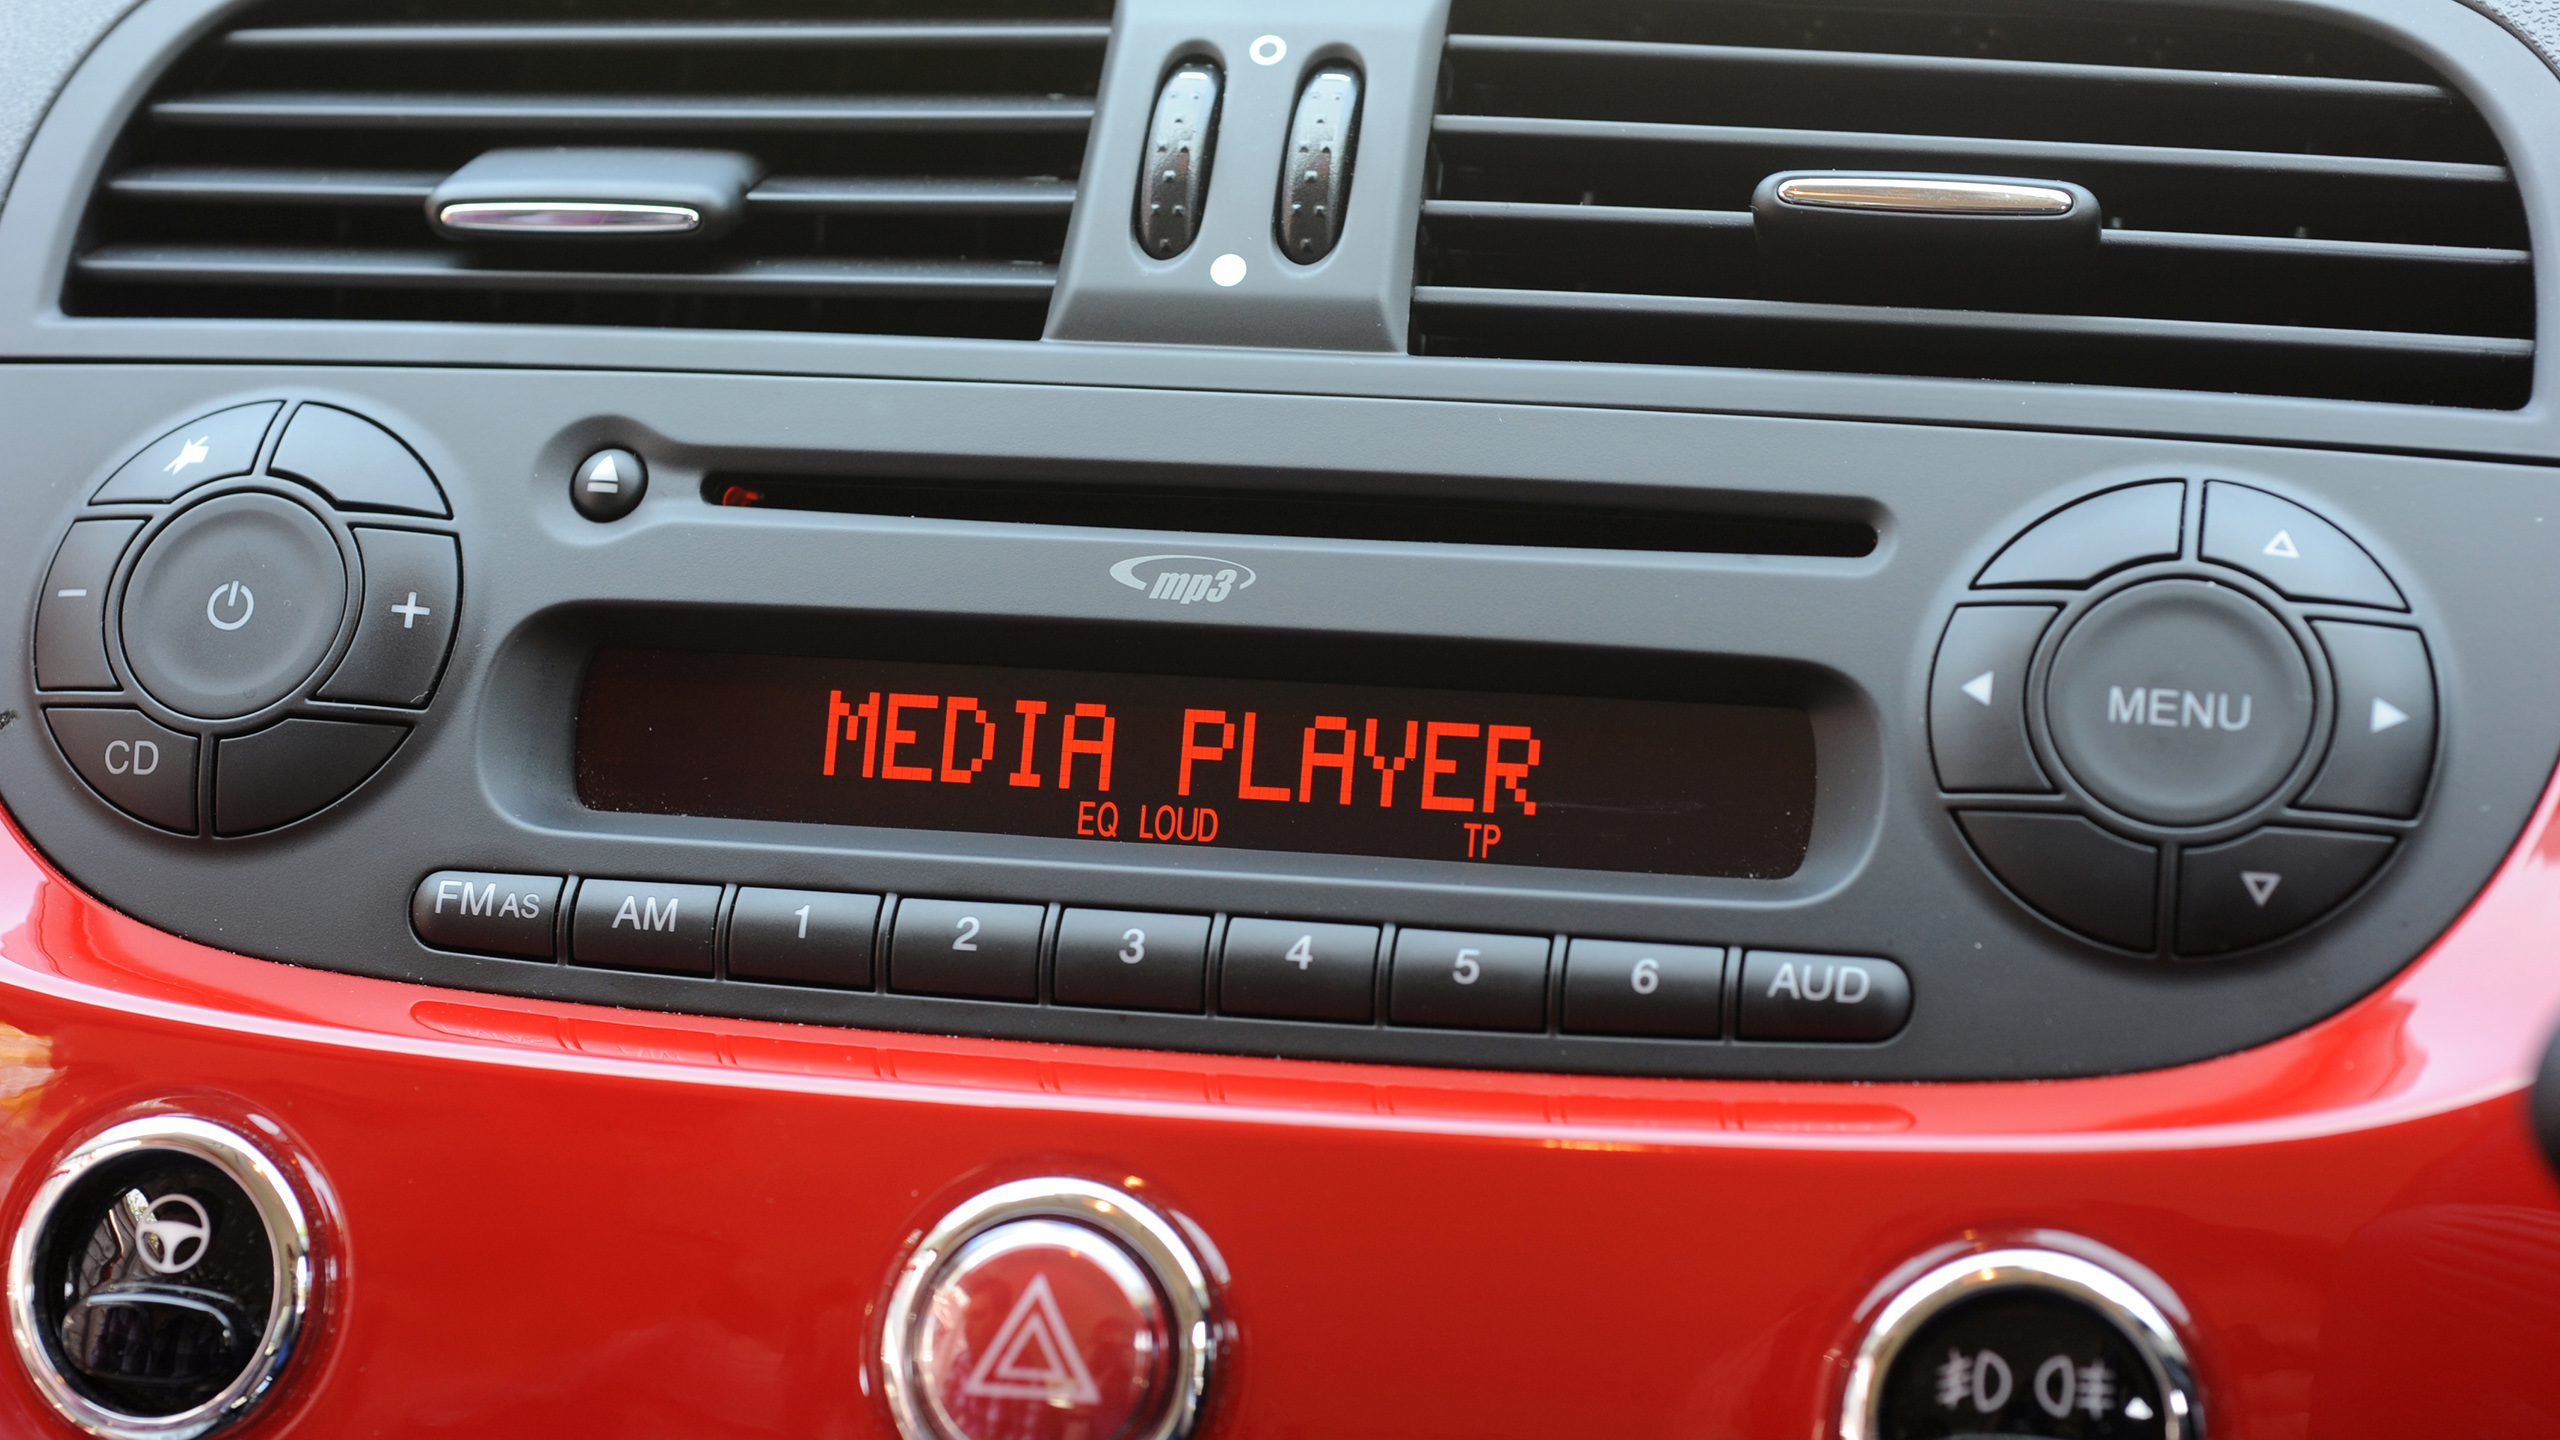 Conservative Media Claims Conspiracy Killing AM Radios in Cars, Not Dying Format